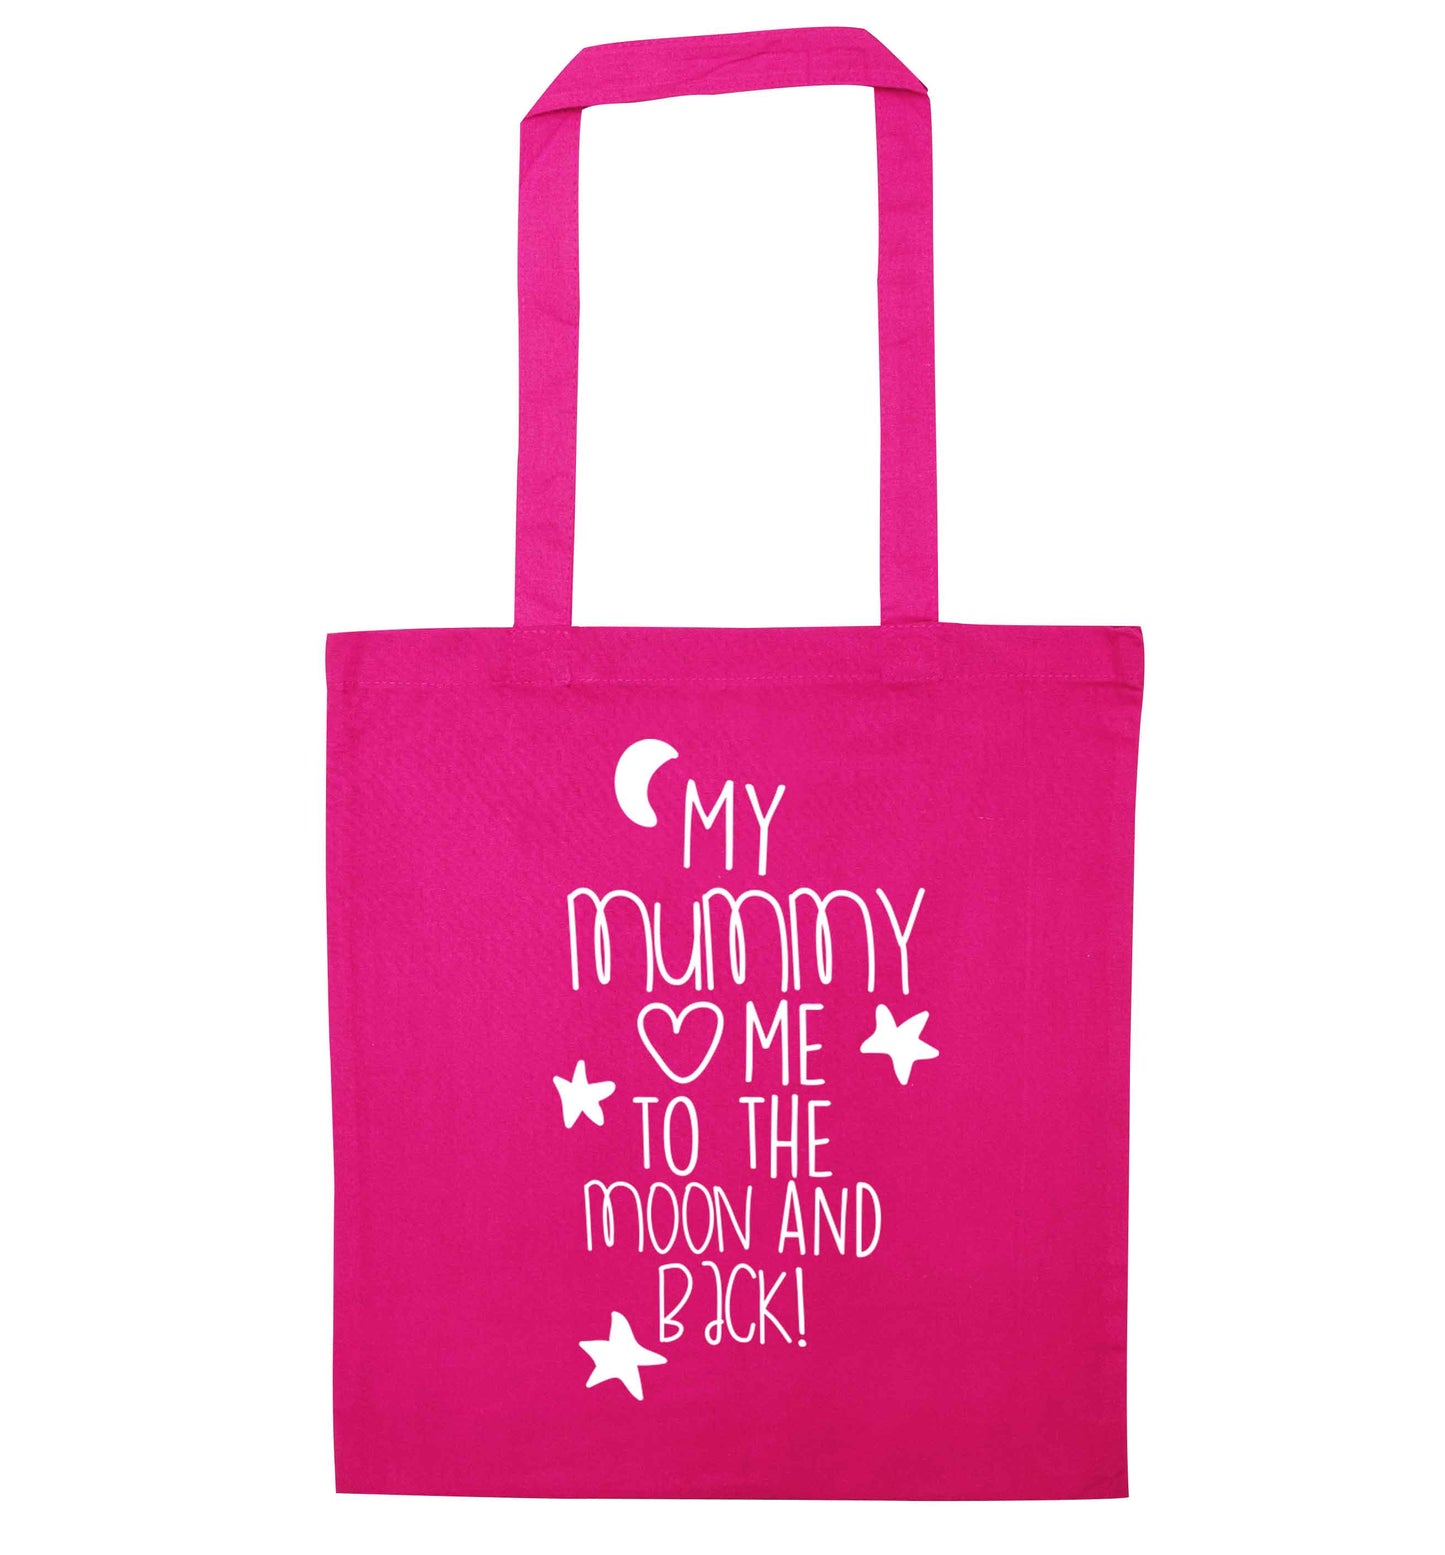 My mum loves me to the moon and back pink tote bag